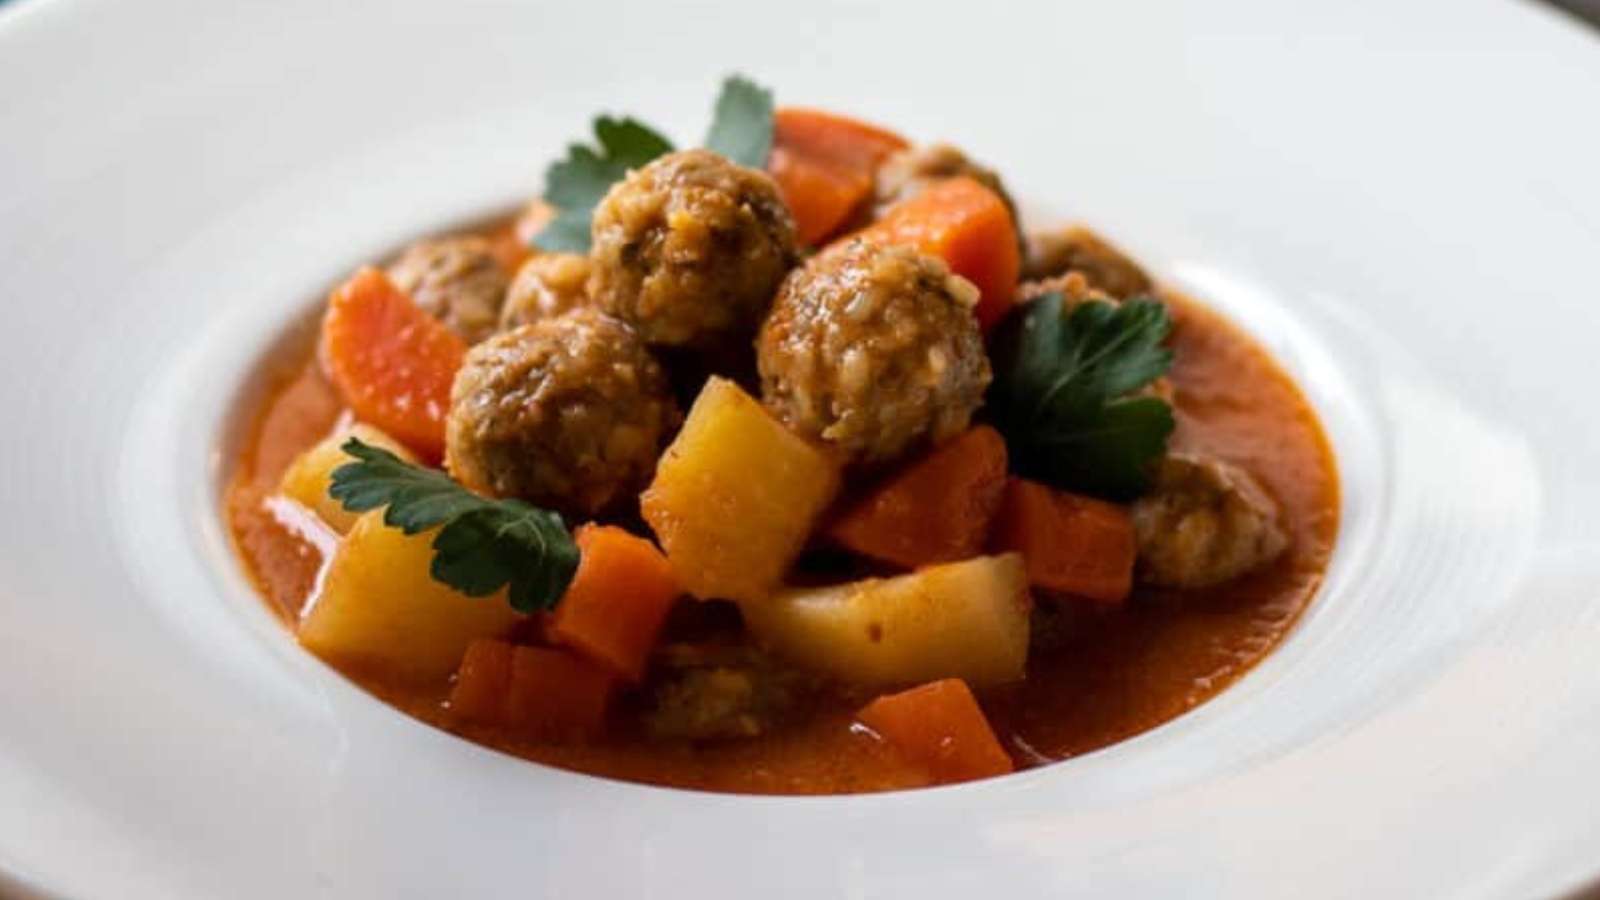 A bowl of stew with meatballs and carrots.